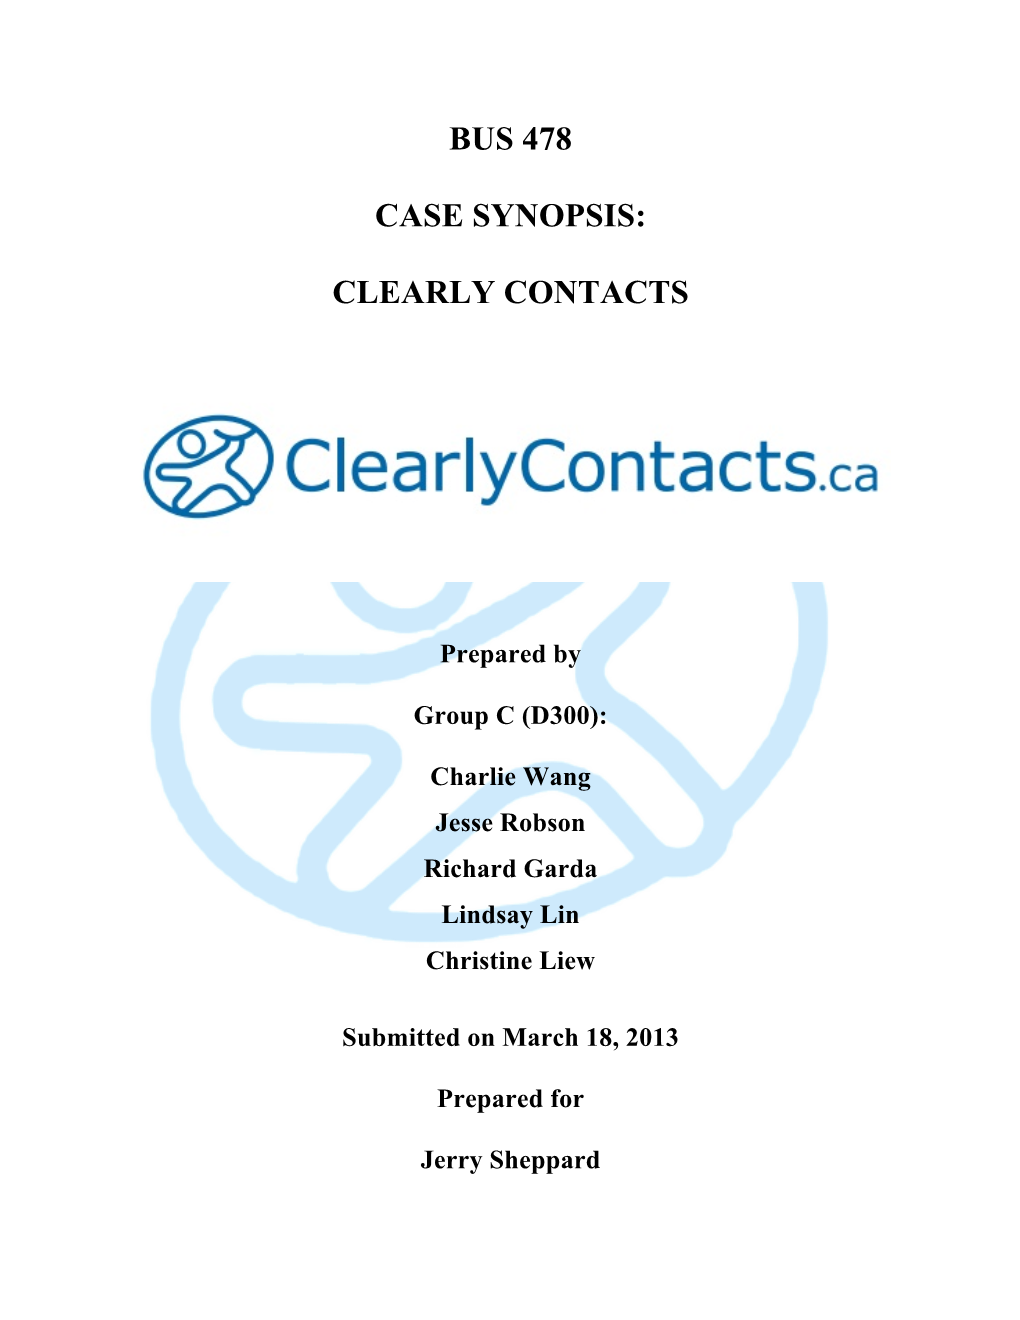 Bus 478 Case Synopsis: Clearly Contacts